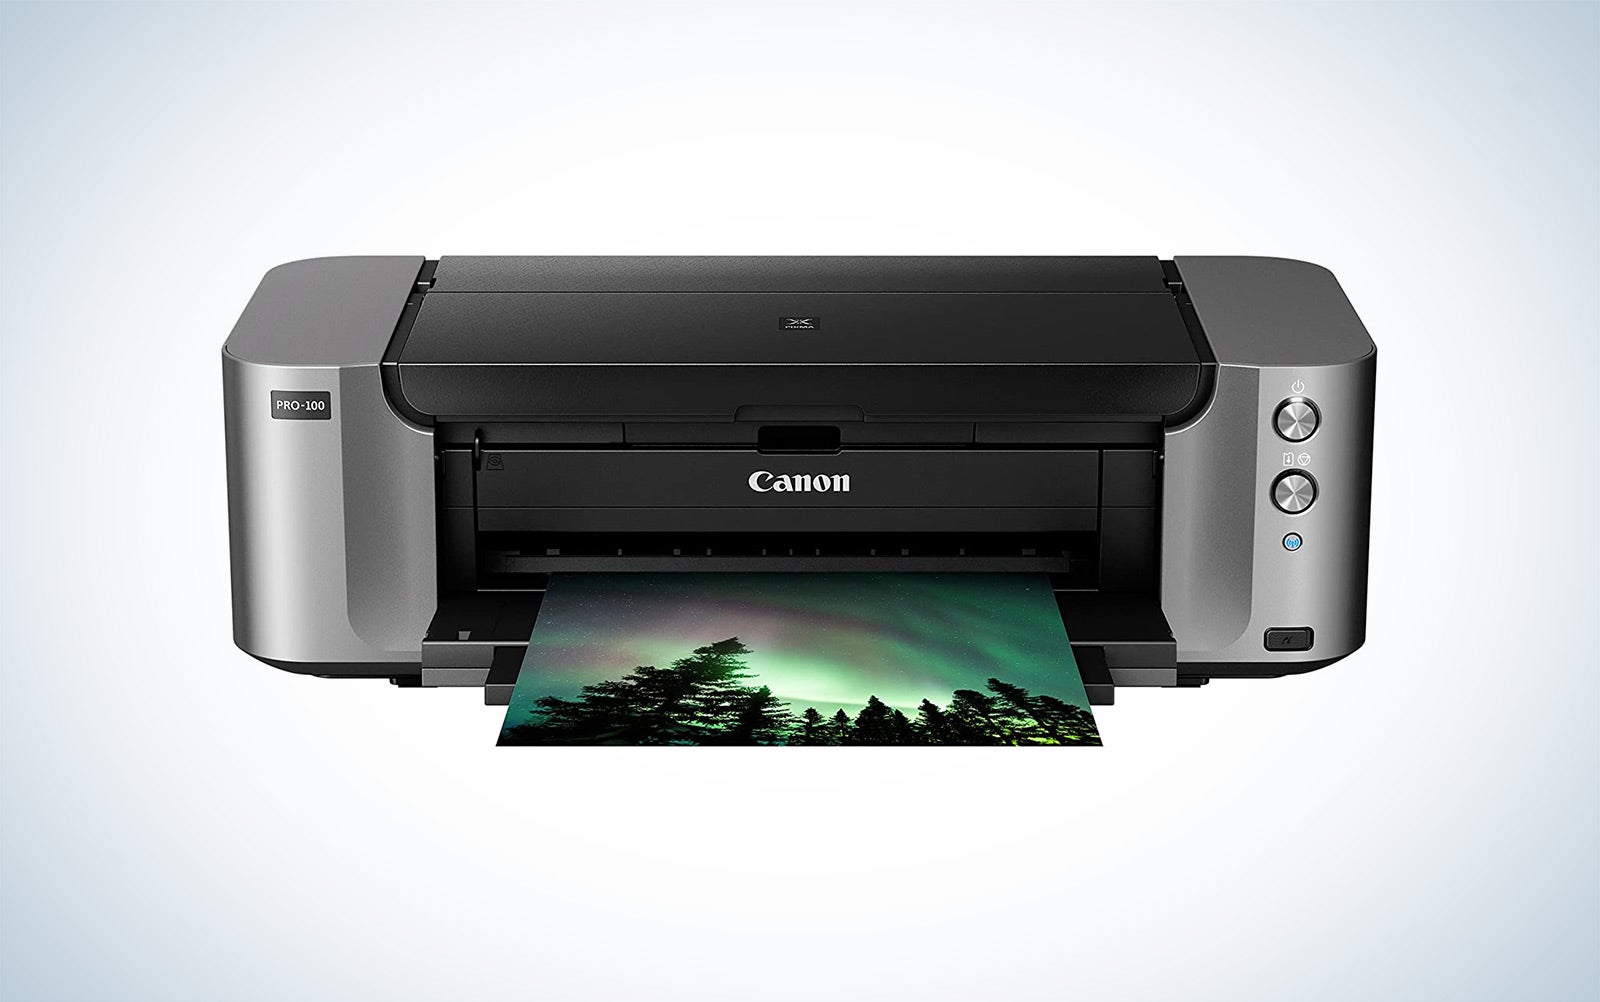 The Canon Pixma Pro-100 is the best professional photo printer.